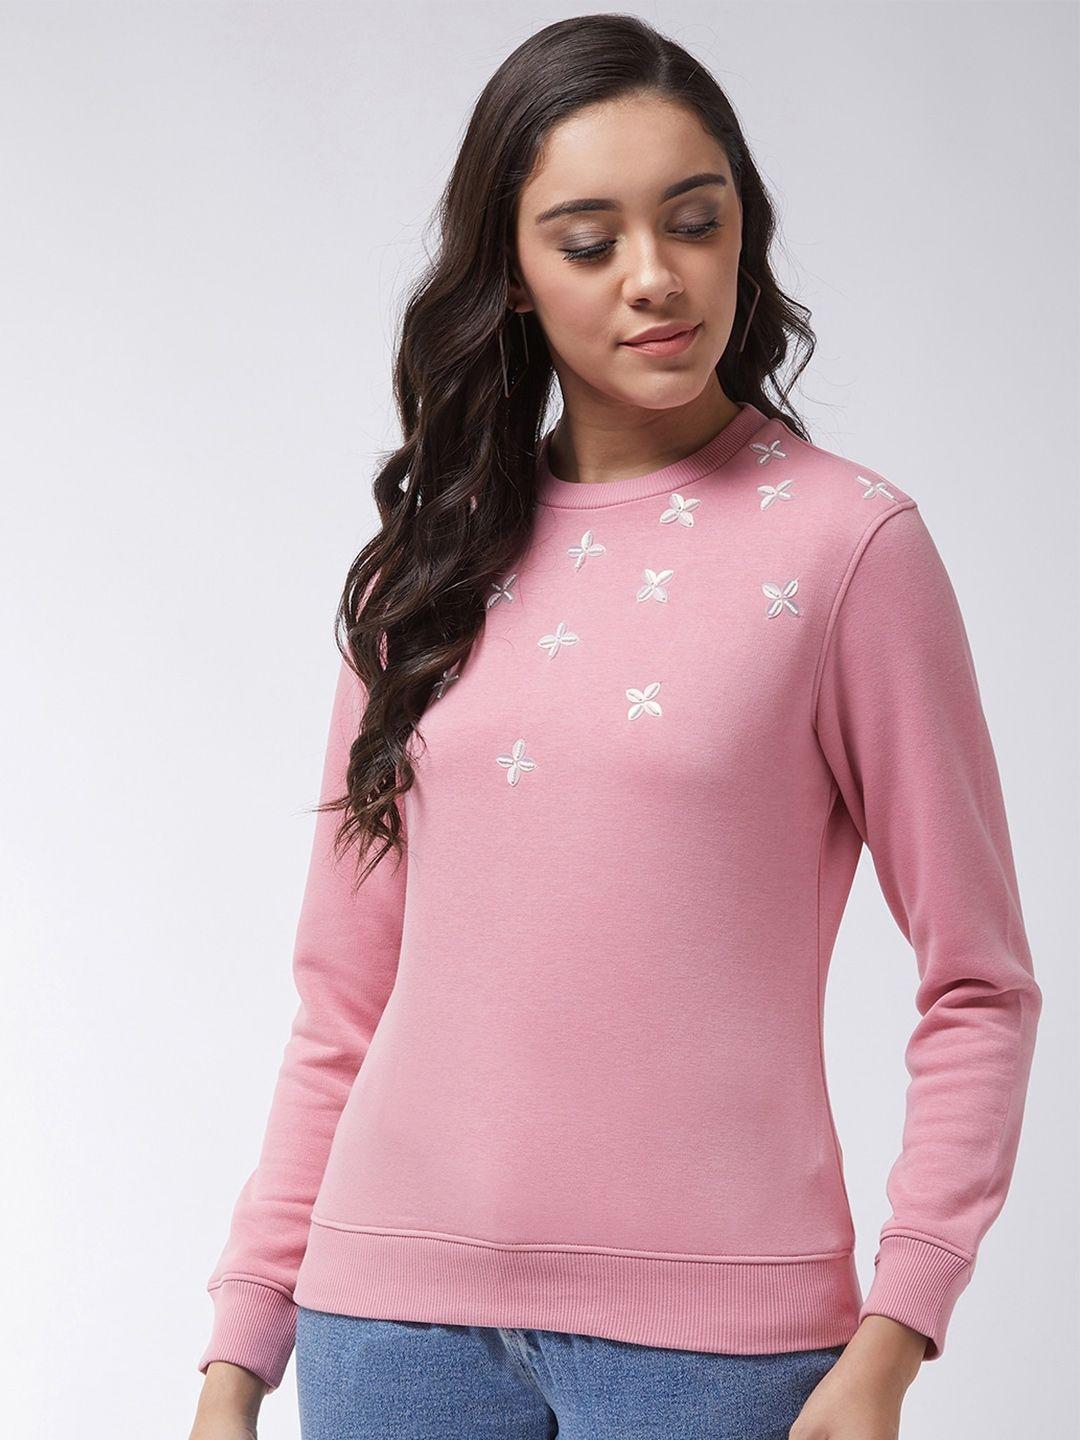 modeve embroidered pullover sweatshirt